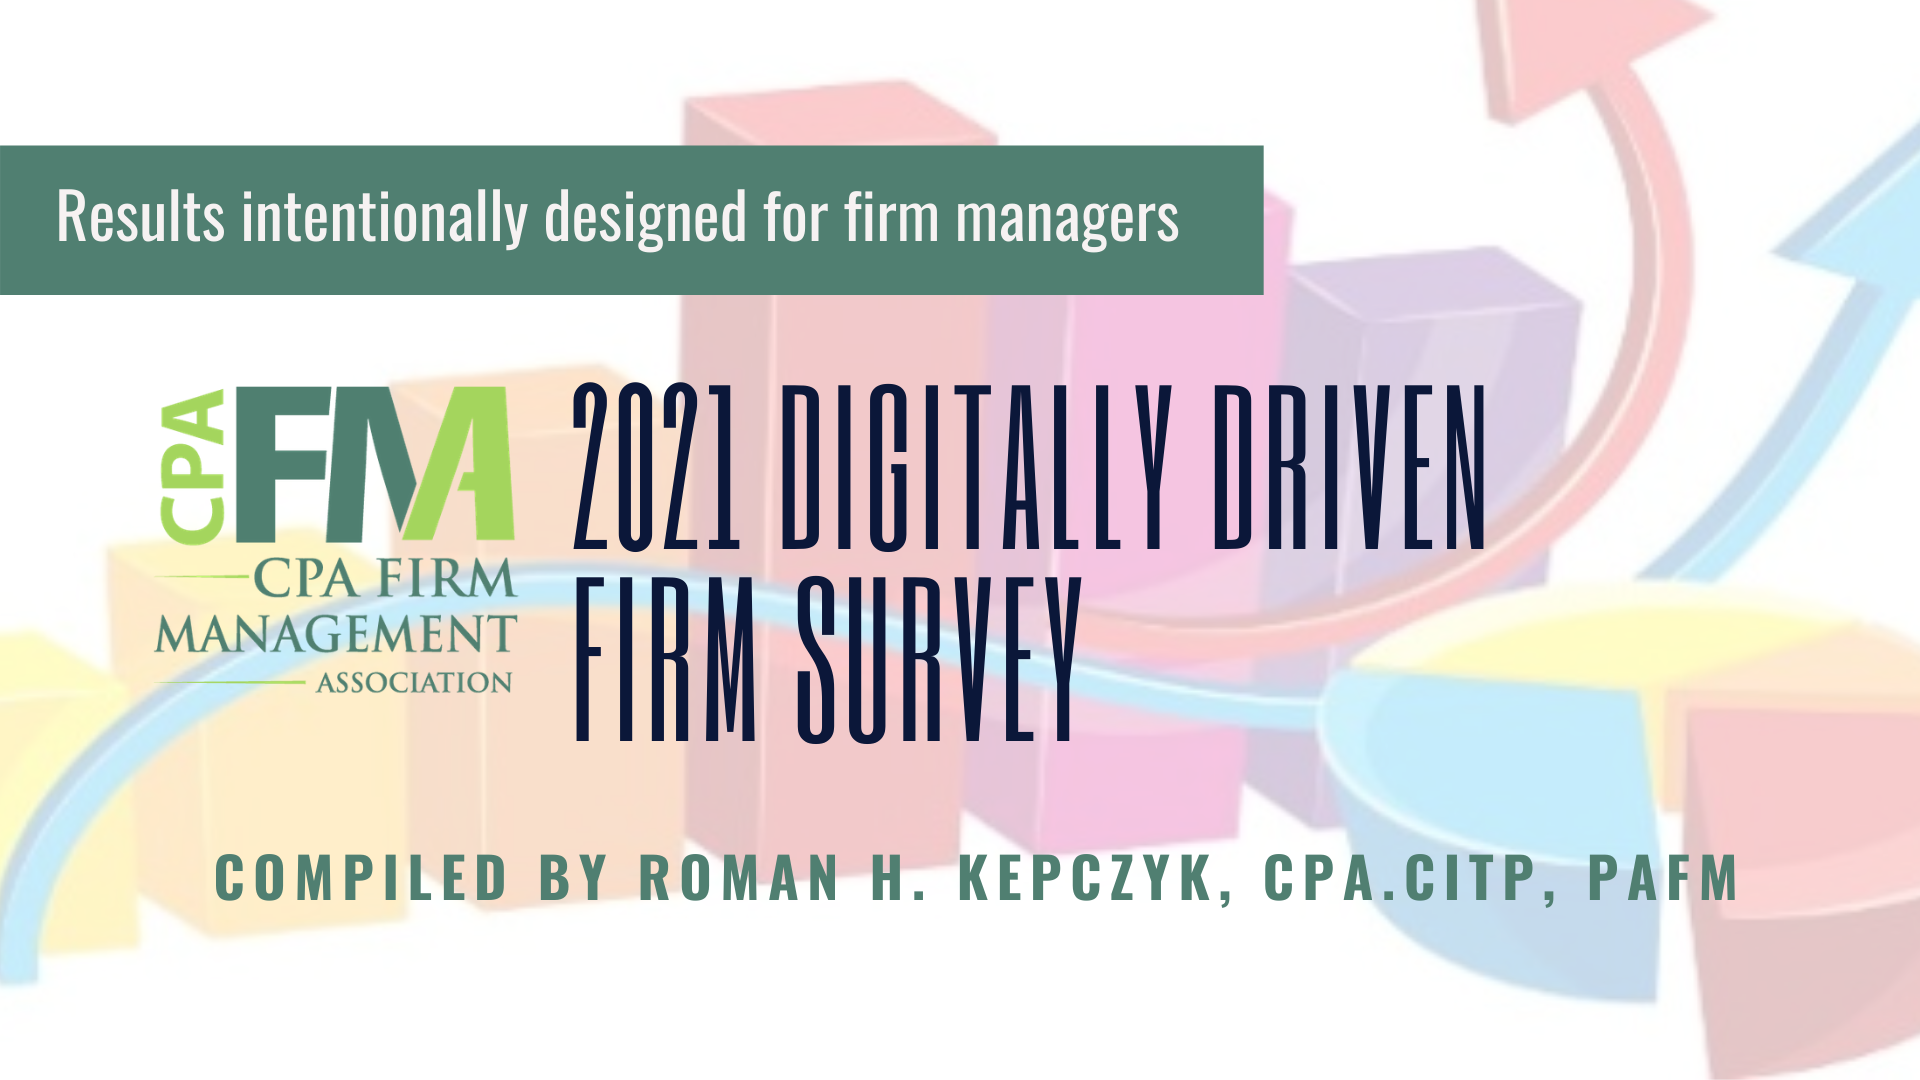 2021 Digitally Driven (Paperless) Benchmark Survey Results